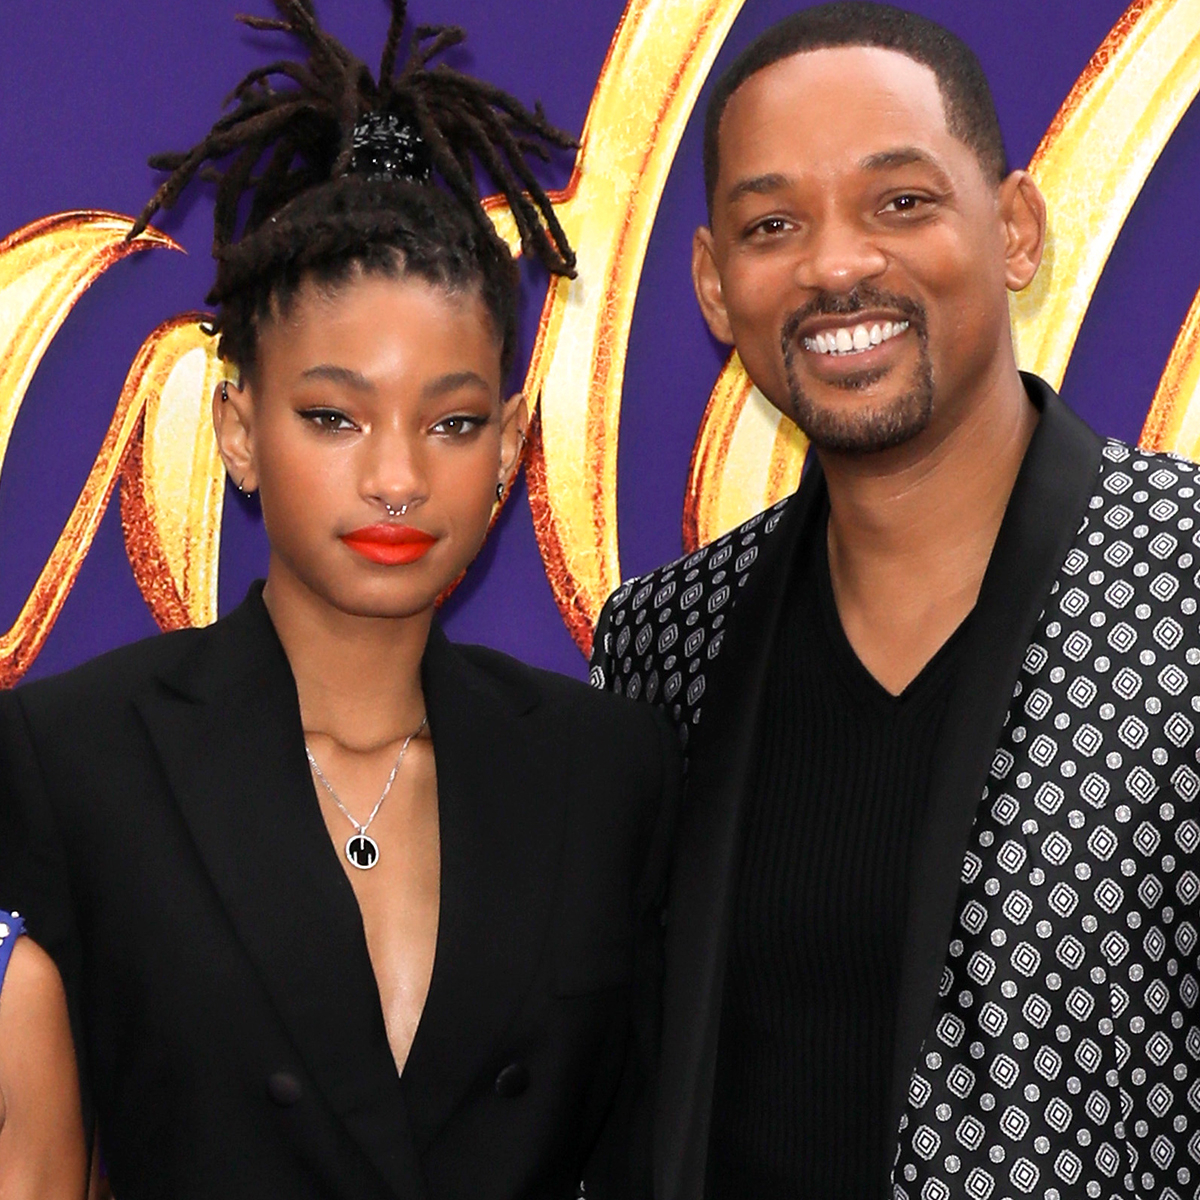 If Jaden and Willow Smith had not had Will Smith as their father would they  still have made it? - Quora